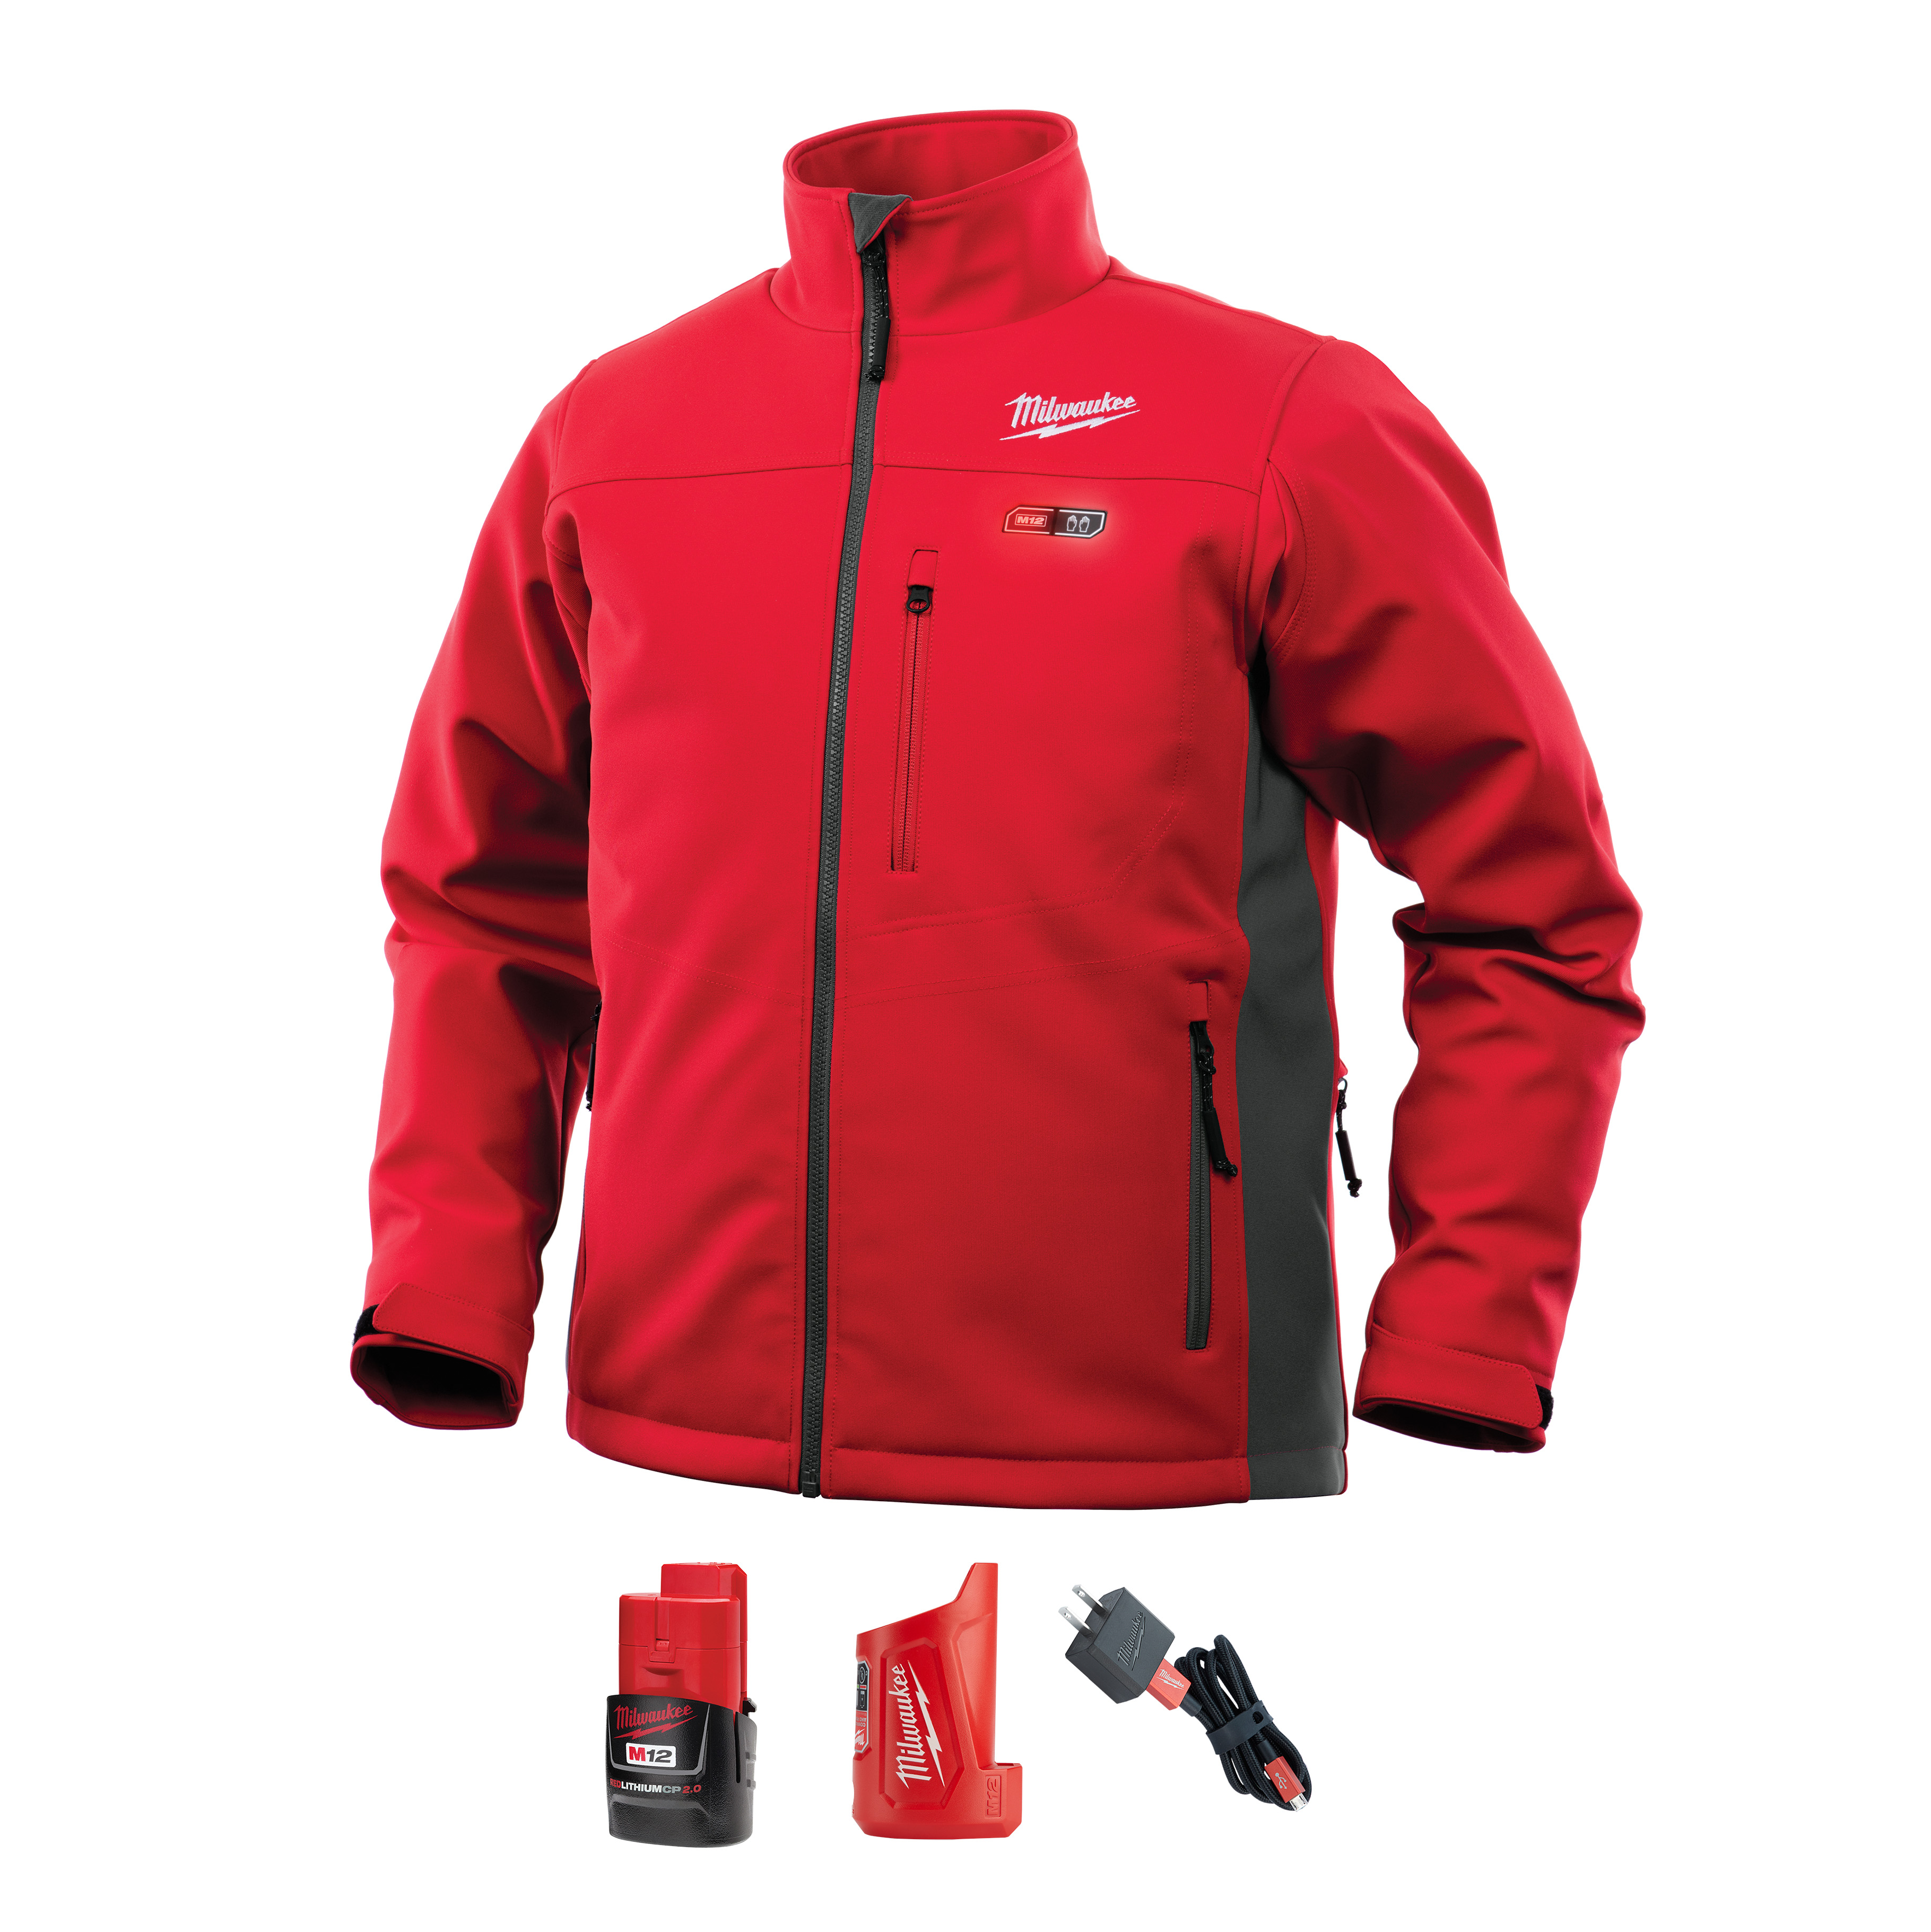 Powered by M12™ REDLITHIUM™ battery technology, Milwaukee® M12™ heated ToughShell™ jackets use carbon fiber heating elements to create and distribute heat to the chest, back, and front hand pockets. A one-touch LED controller allows users to select from three heat settings, delivering ideal heat for any environment. The new quick-heat function allows users to feel heat 3X faster than previous jackets and market competitors. For use in abrasive environments, ToughShell™ stretch polyester delivers 5X longer life than previous QuietShell jackets, and provides wind and water resistance to survive the elements. 22392